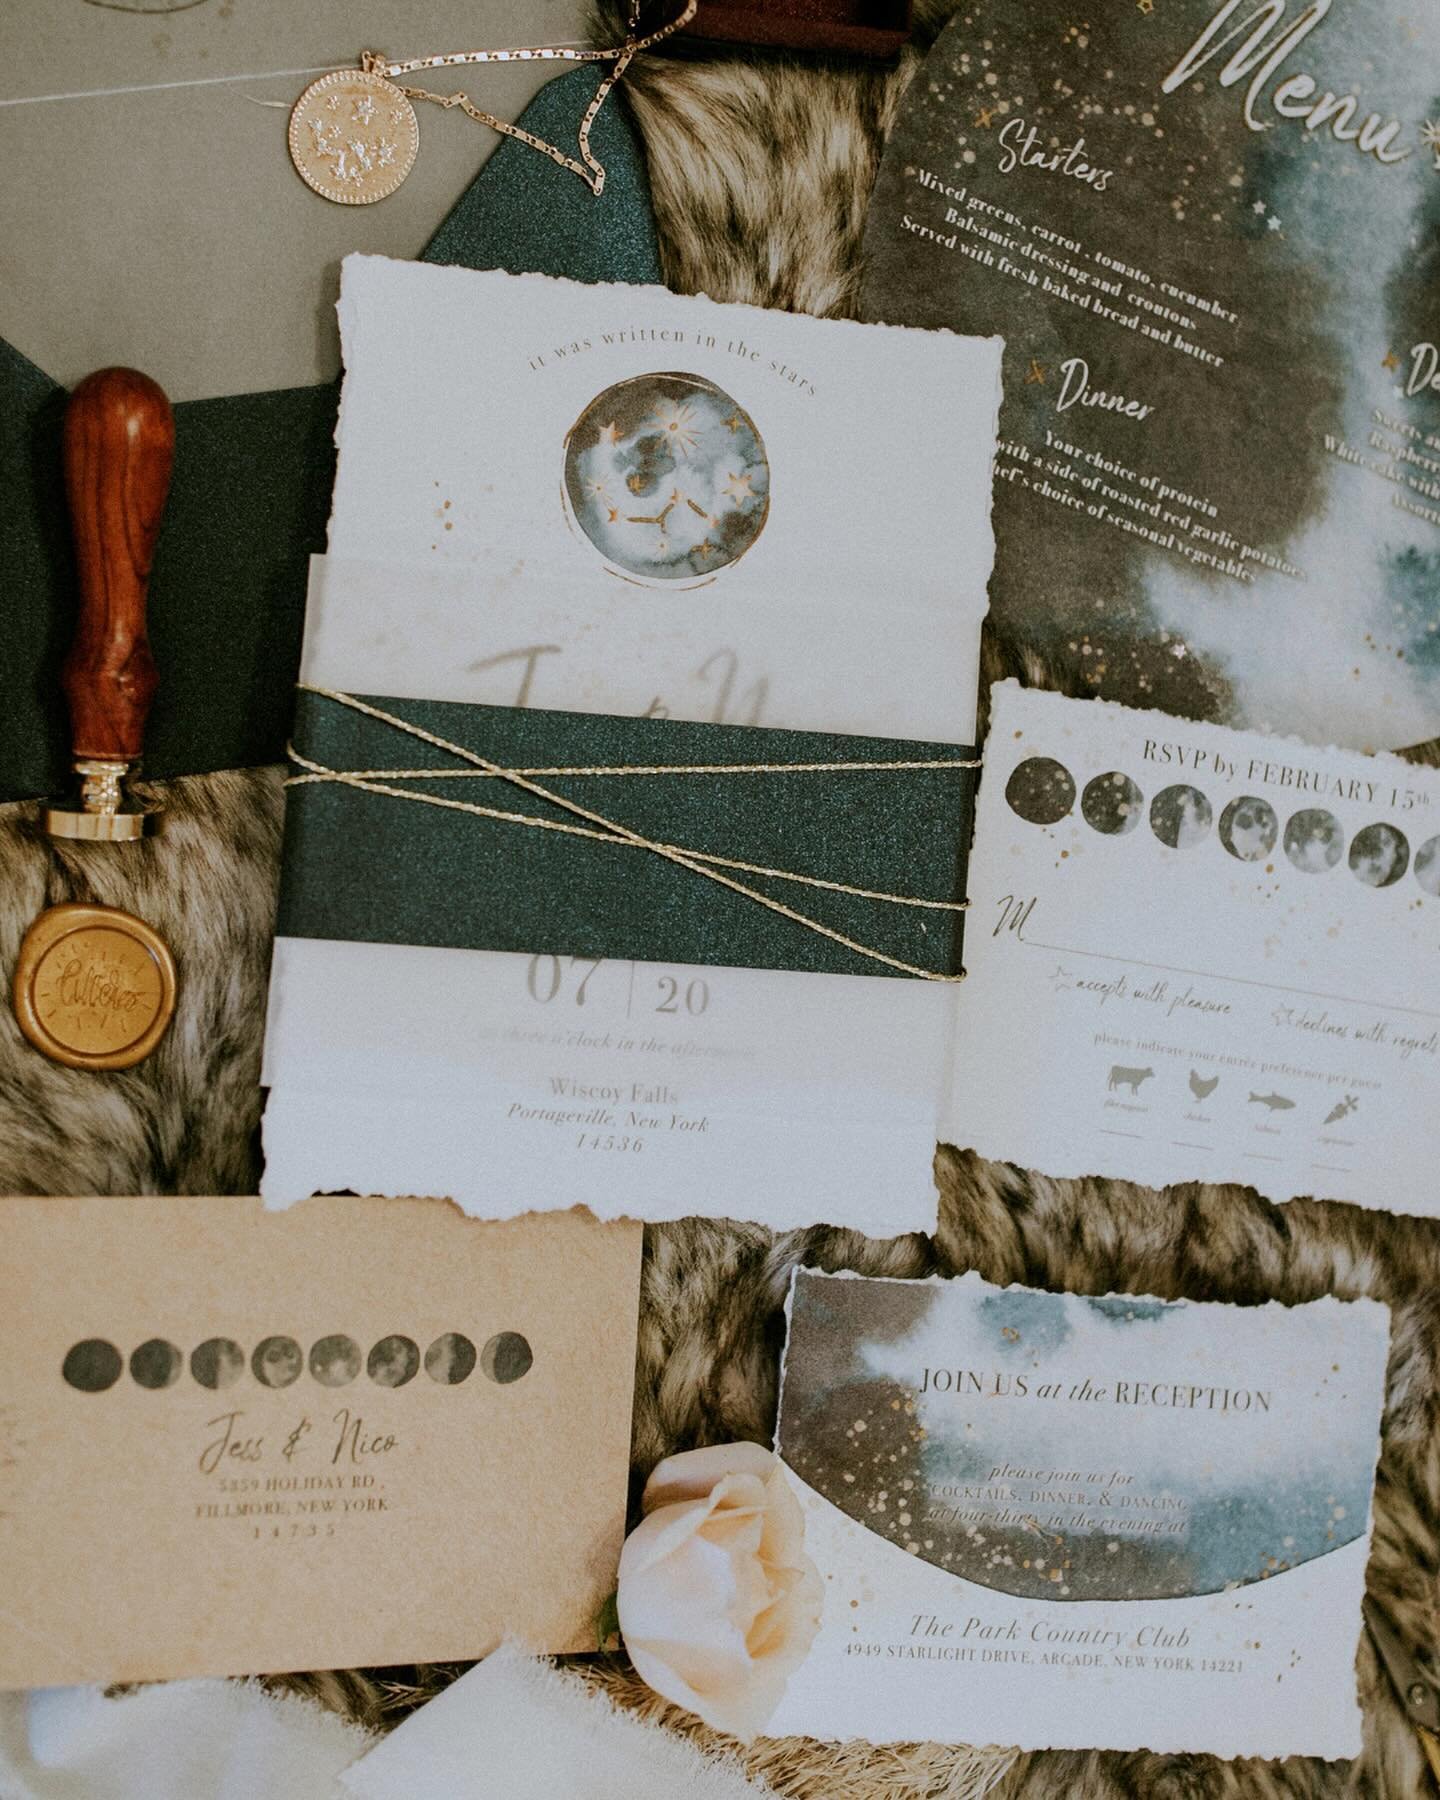 We couldn&rsquo;t pass up this opportunity to reshare this gorgeous celestial styled shoot from 2020! 🌘🌑🌒

There are so many things we love about this styled shoot. What&rsquo;s not to love about a theme that feels so ancient and purposeful, but a